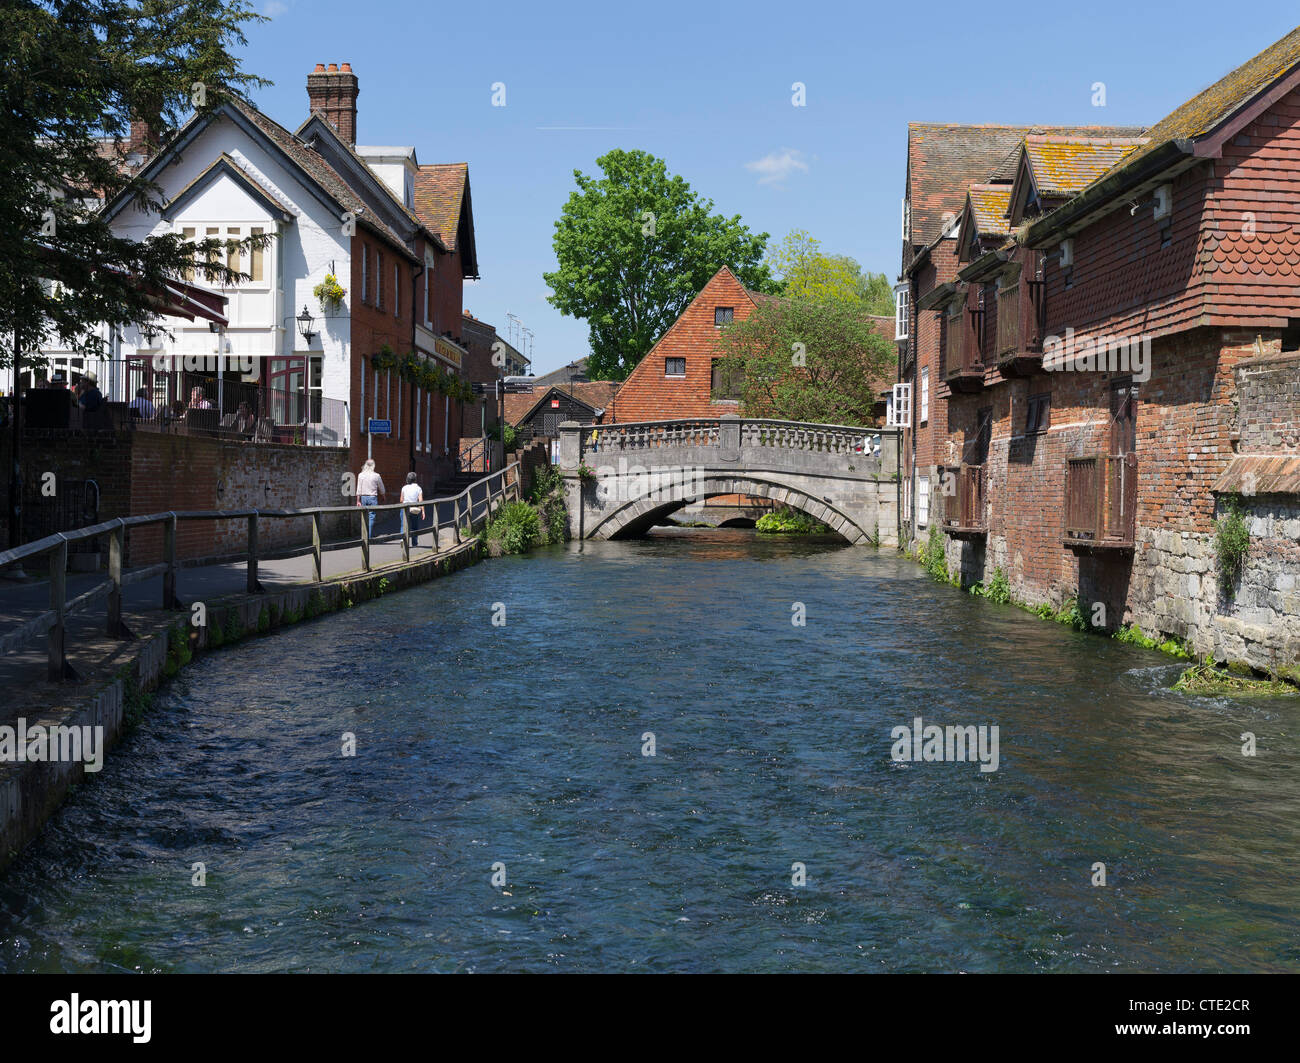 dh River Itchen WINCHESTER HAMPSHIRE Winchester river itchen Bishop on the Bridge pub and rivers buildings uk riverside city walk Stock Photo